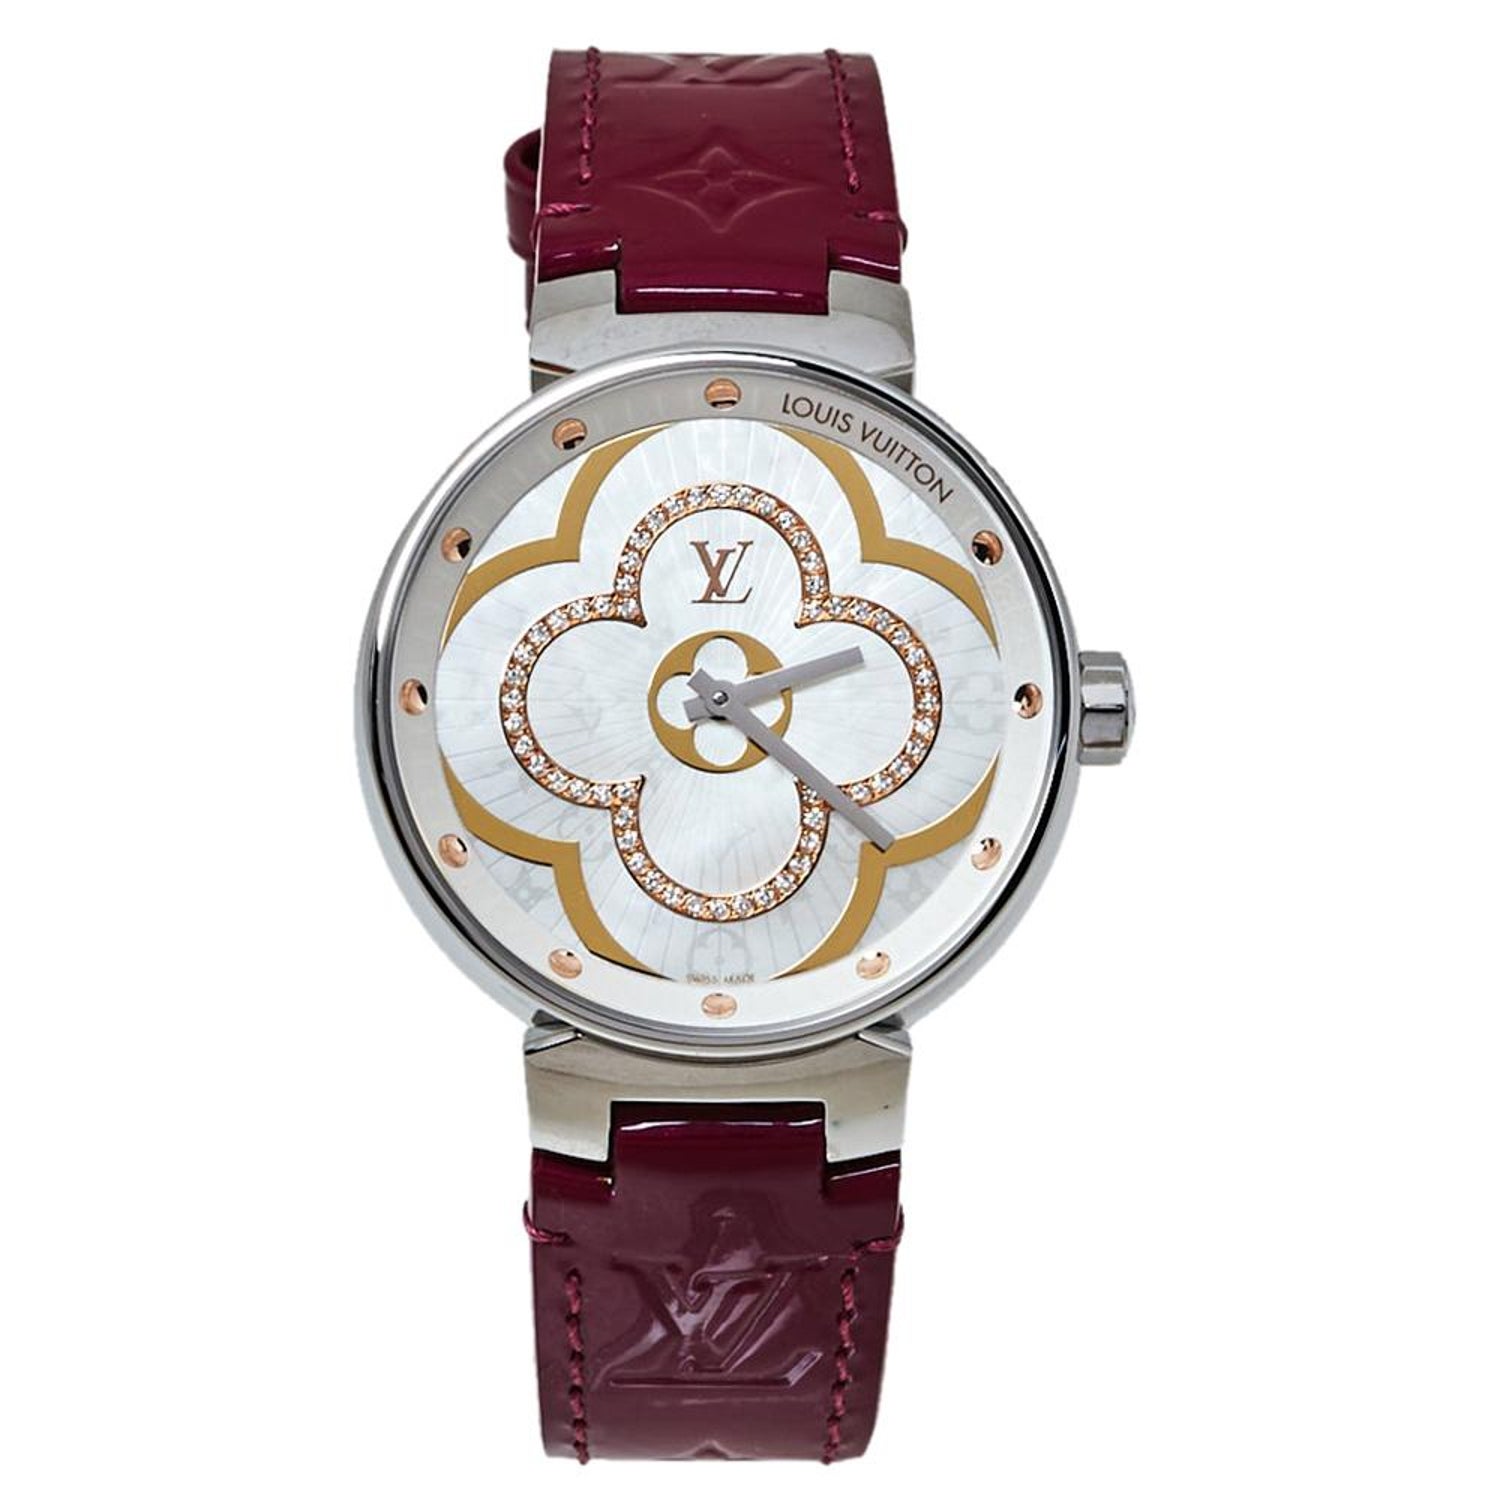 Louis Vuitton Flower Watch - 4 For Sale on 1stDibs